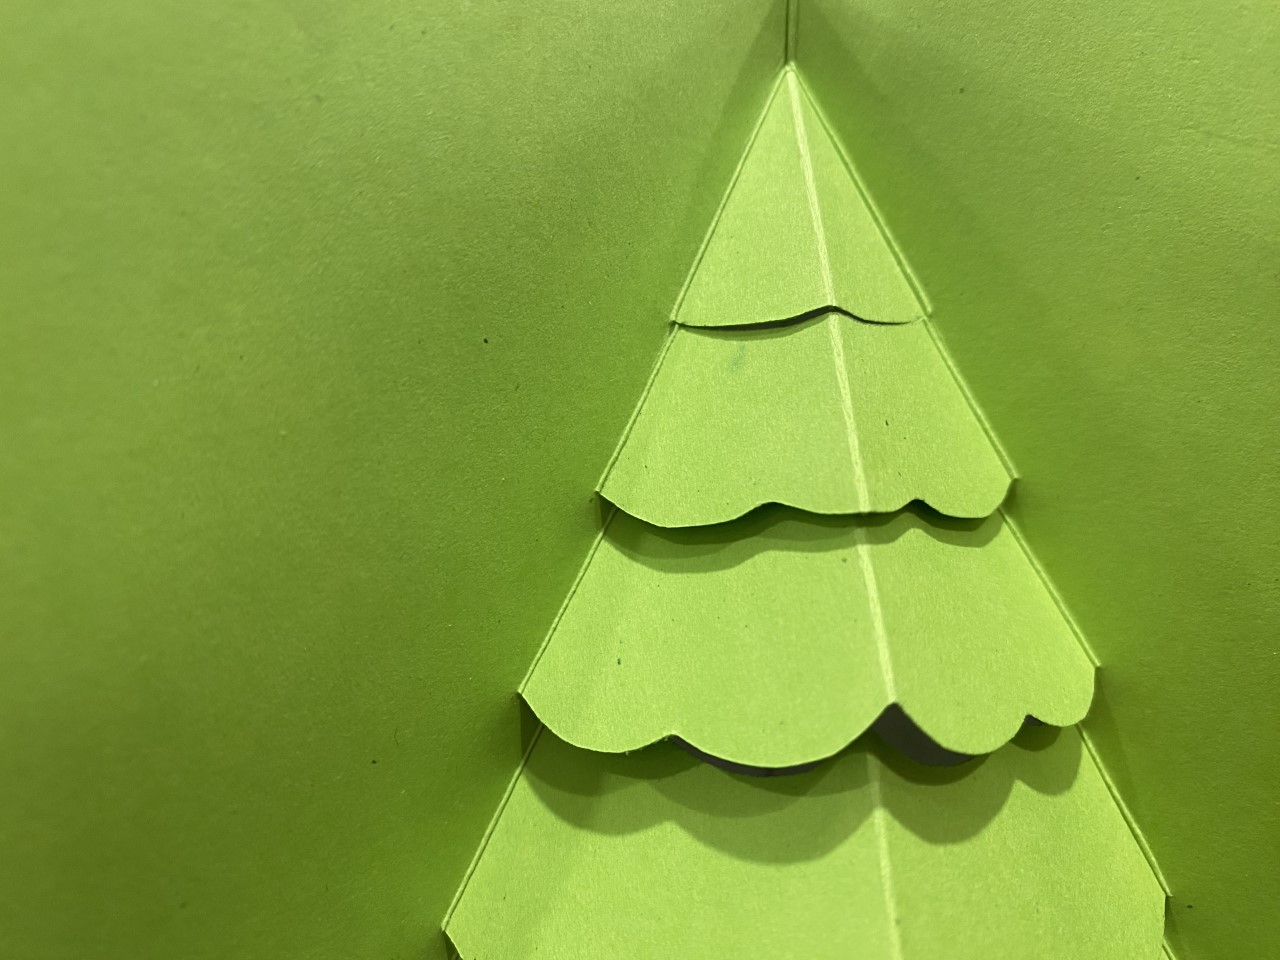 close up image of a pine tree pop up card